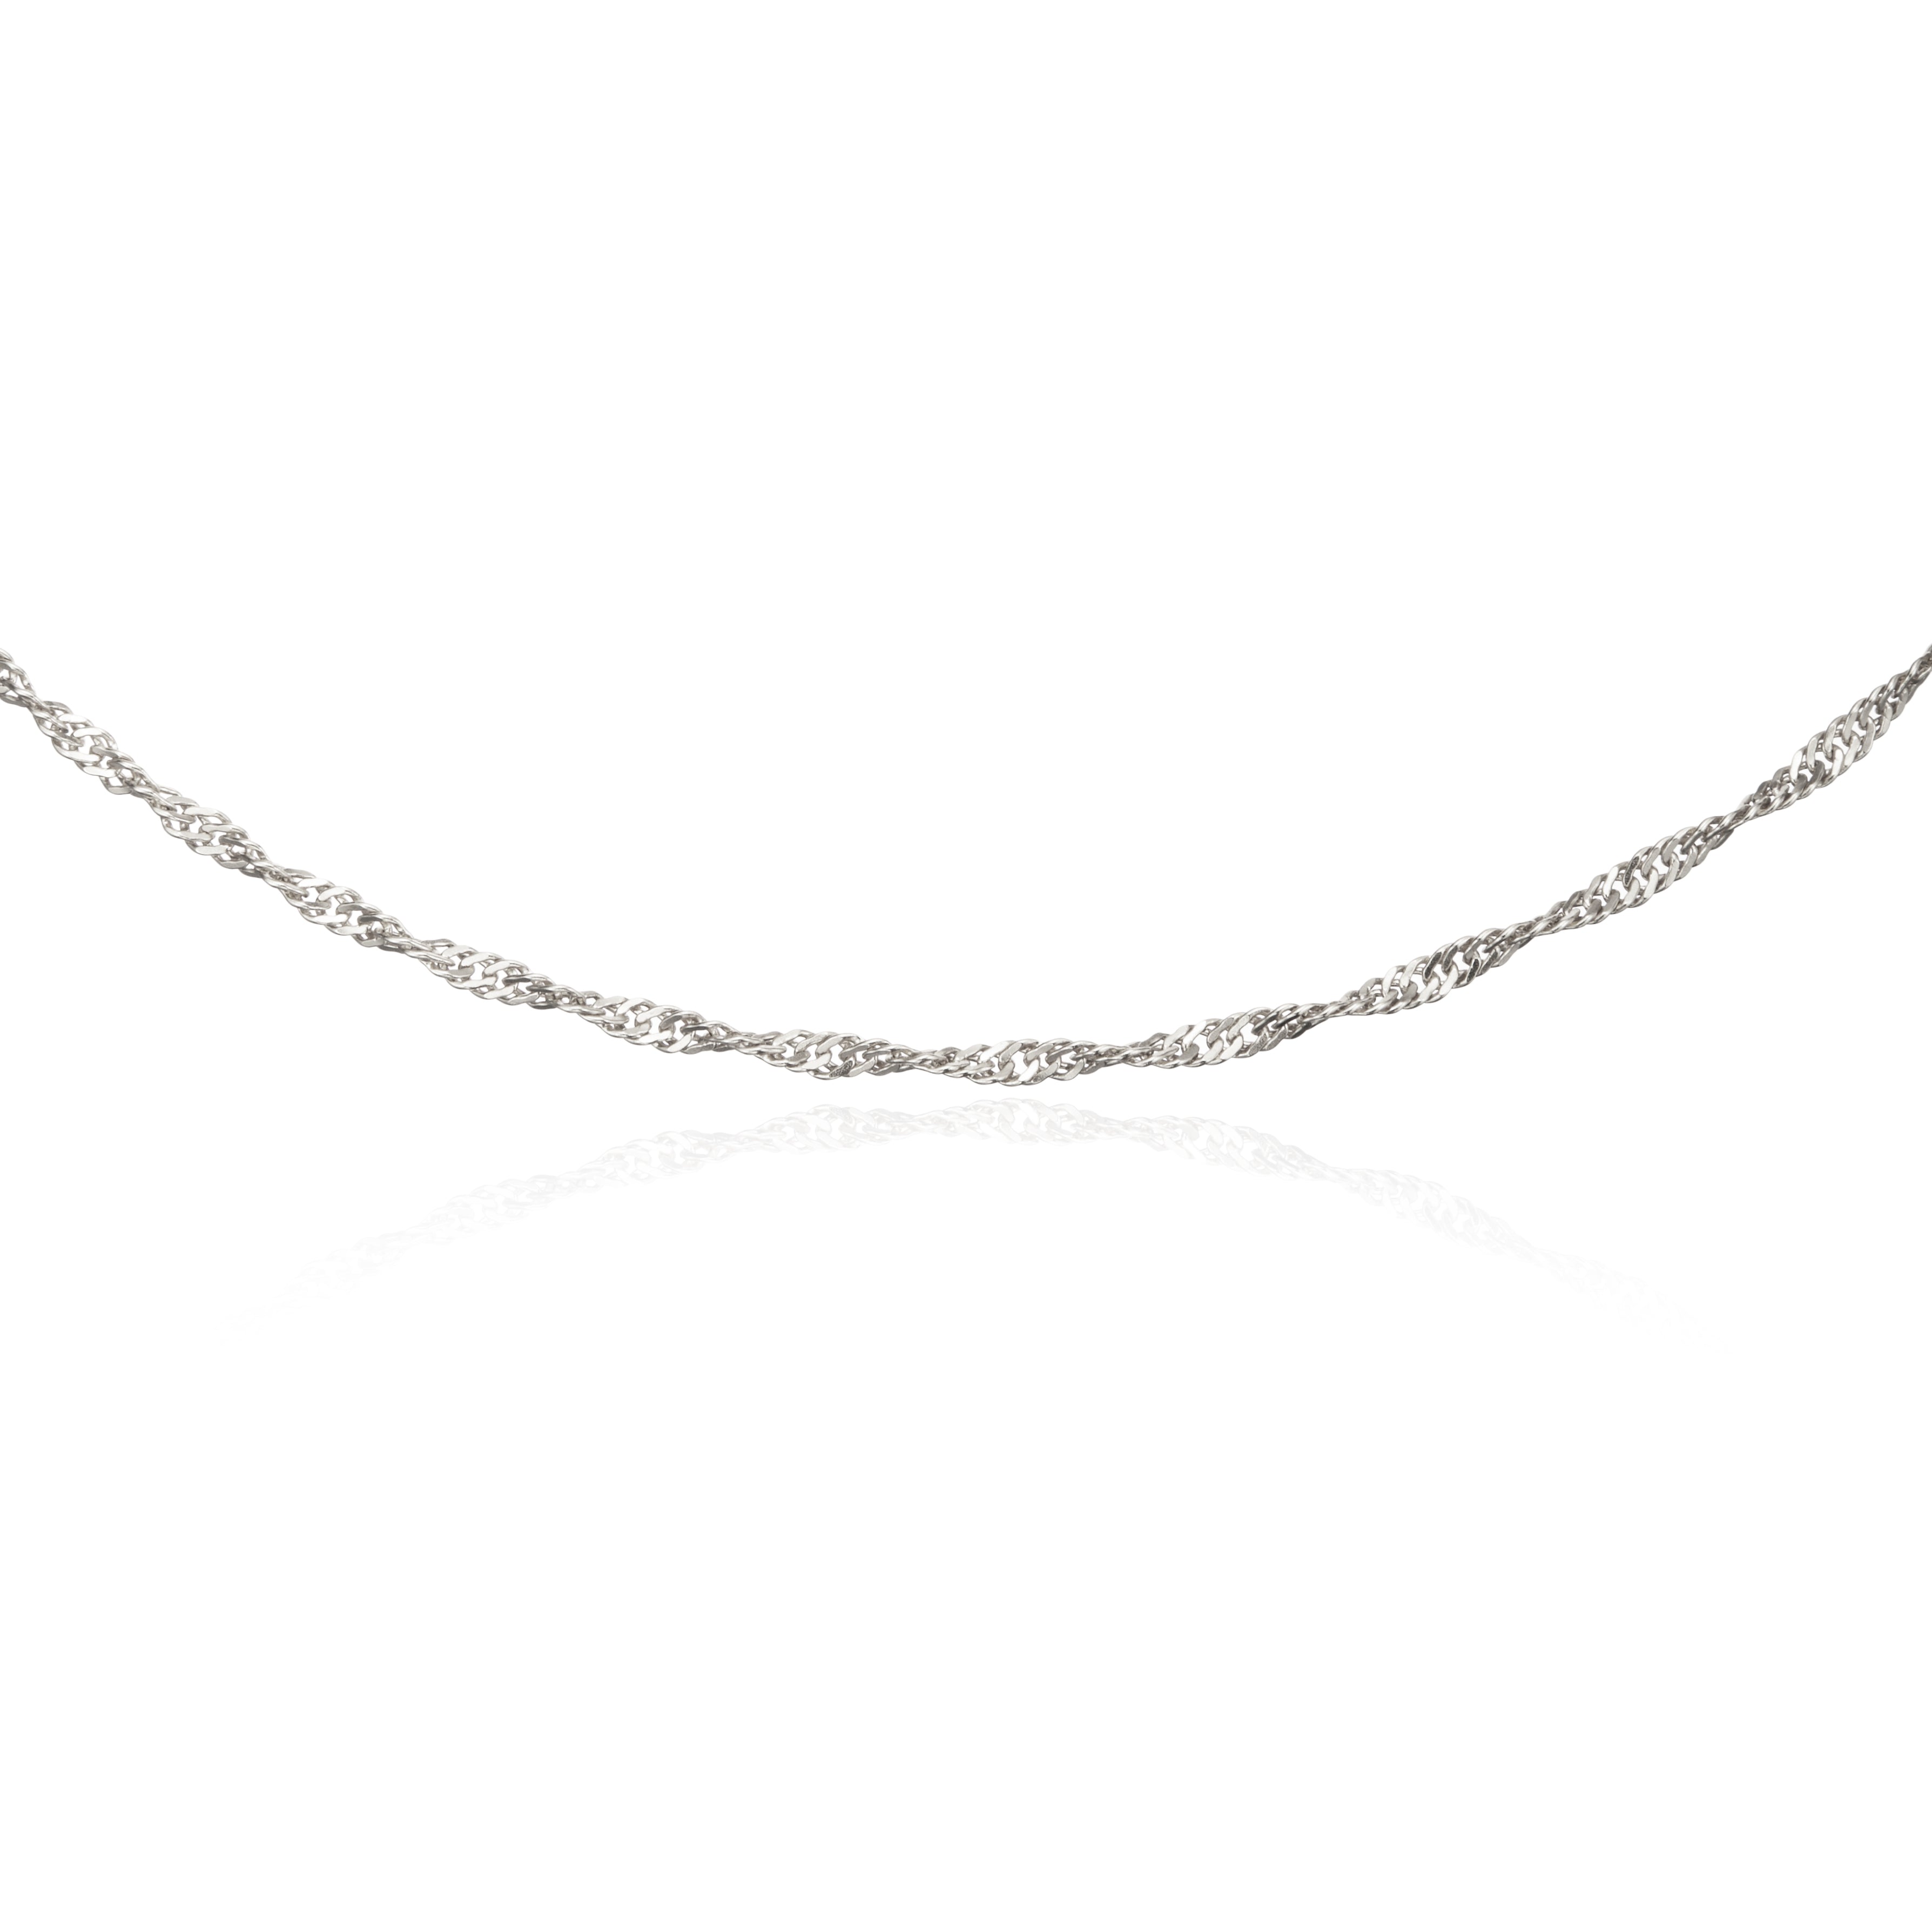 Silver twisted rope chain necklace close up on a white background